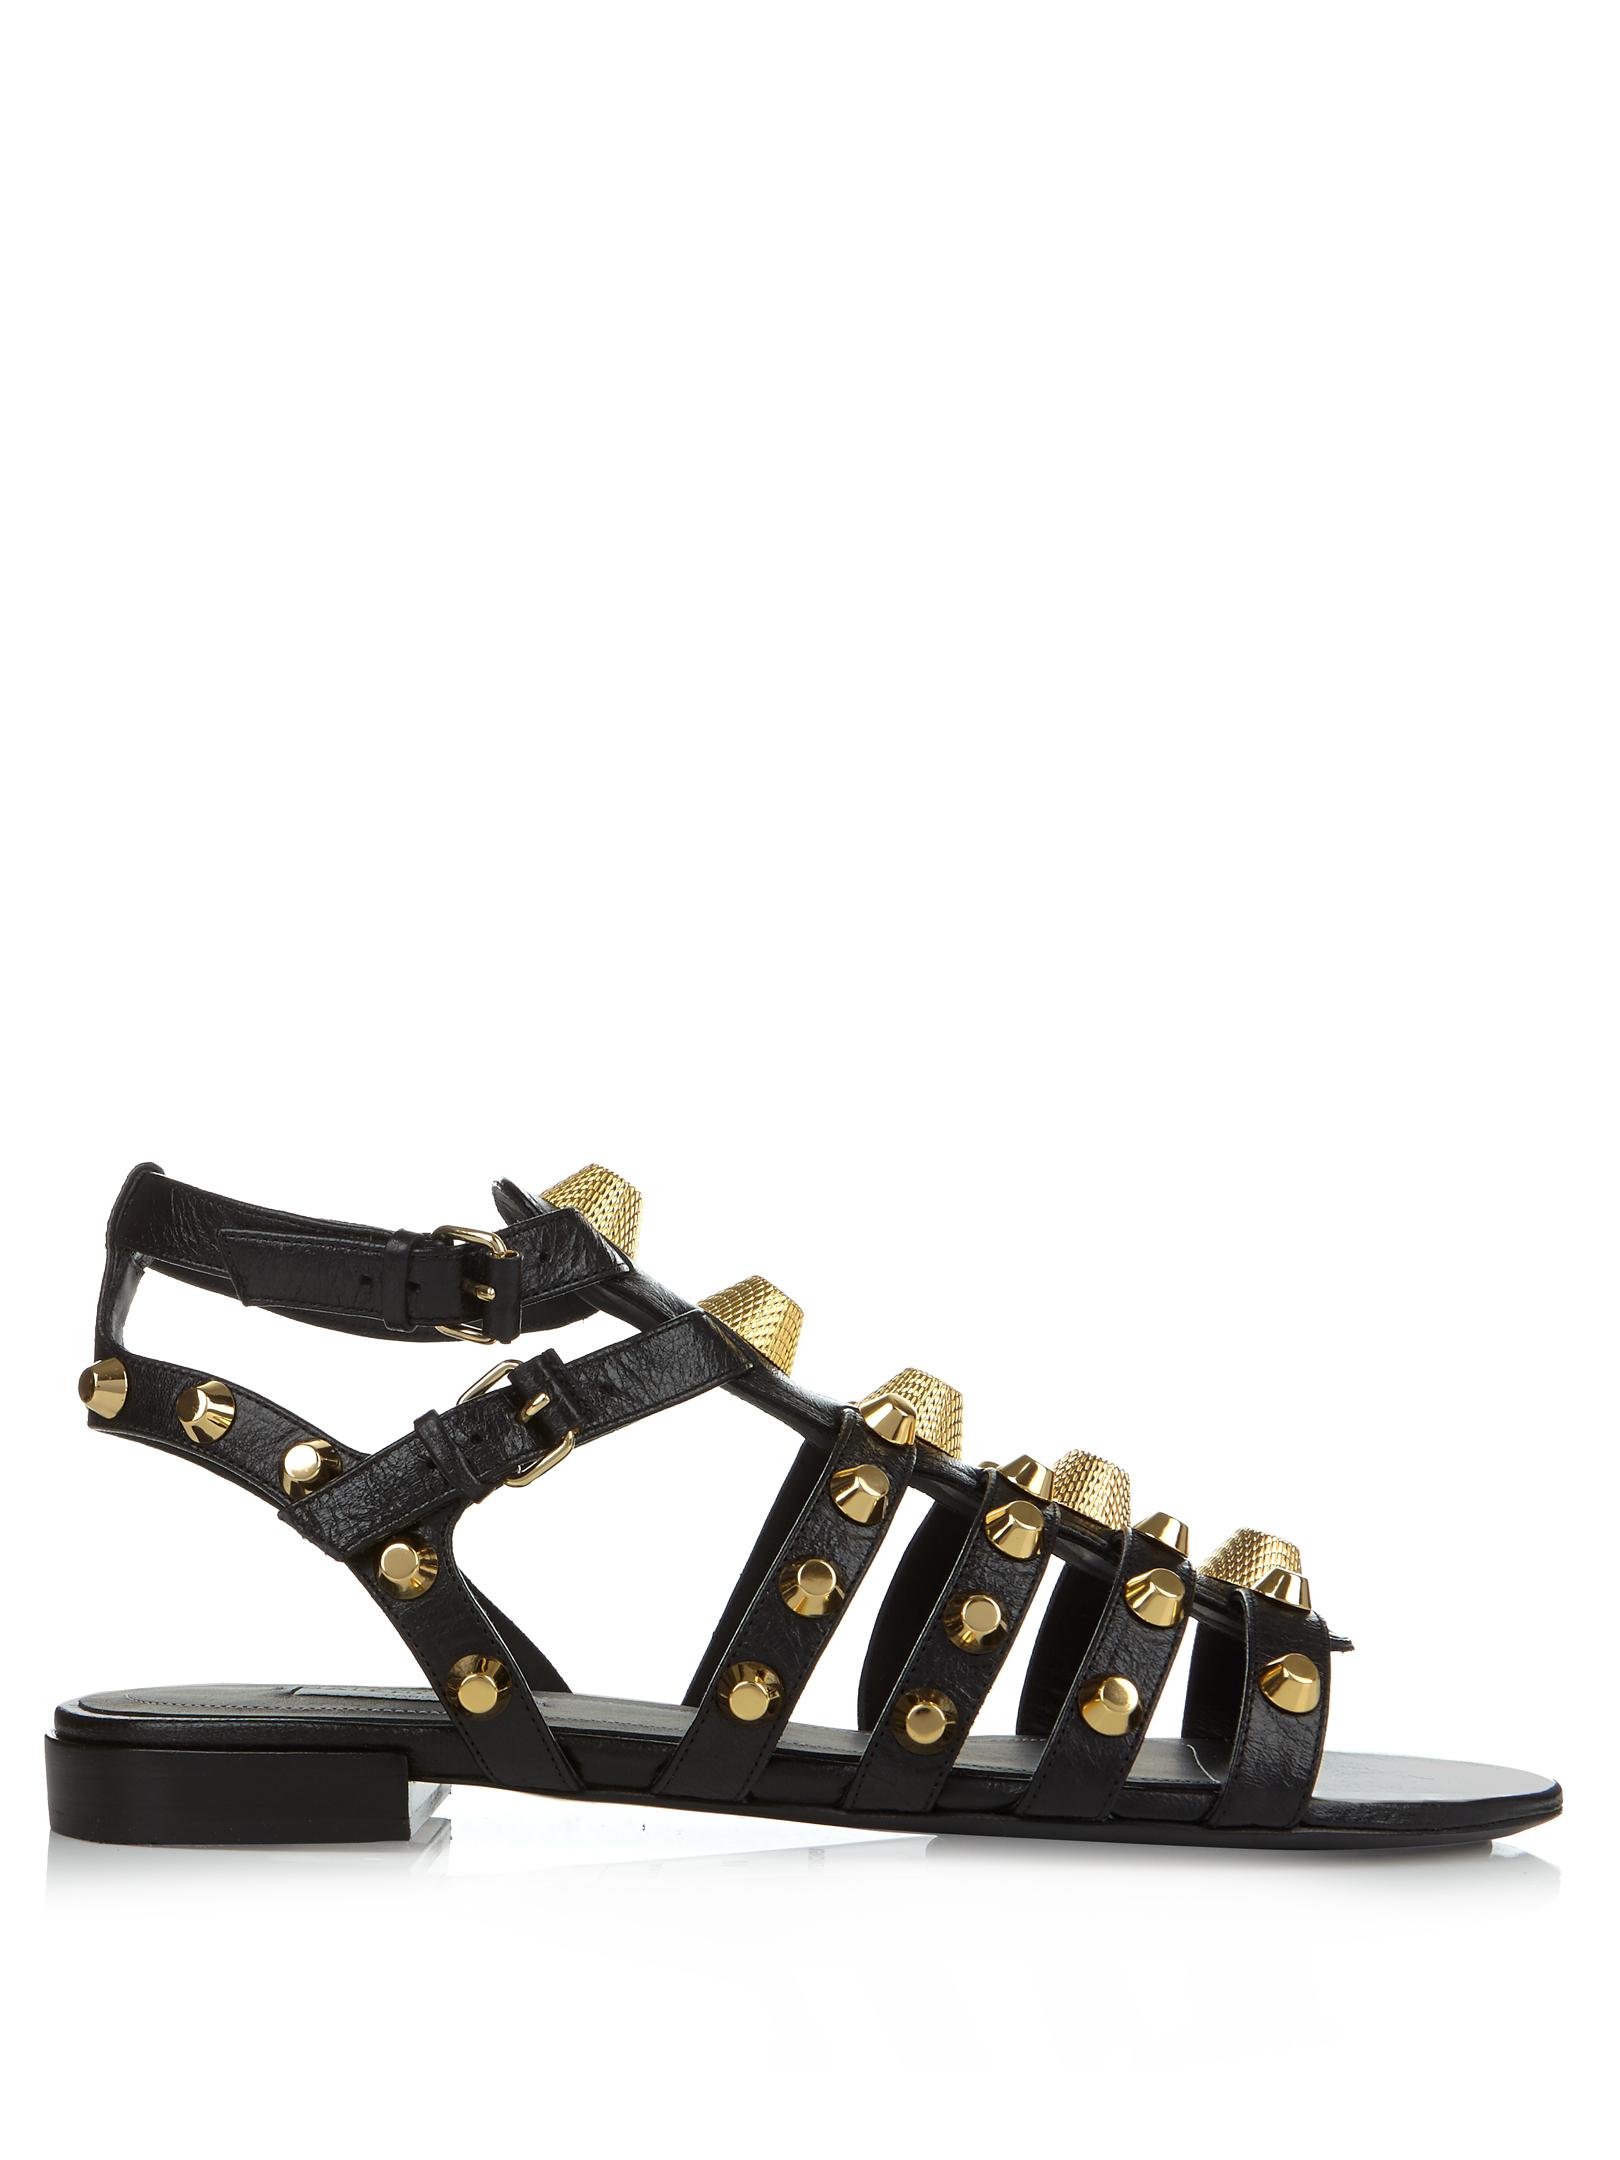 Balenciaga Giant Studded Leather Gladiator Sandals in Black | Lyst